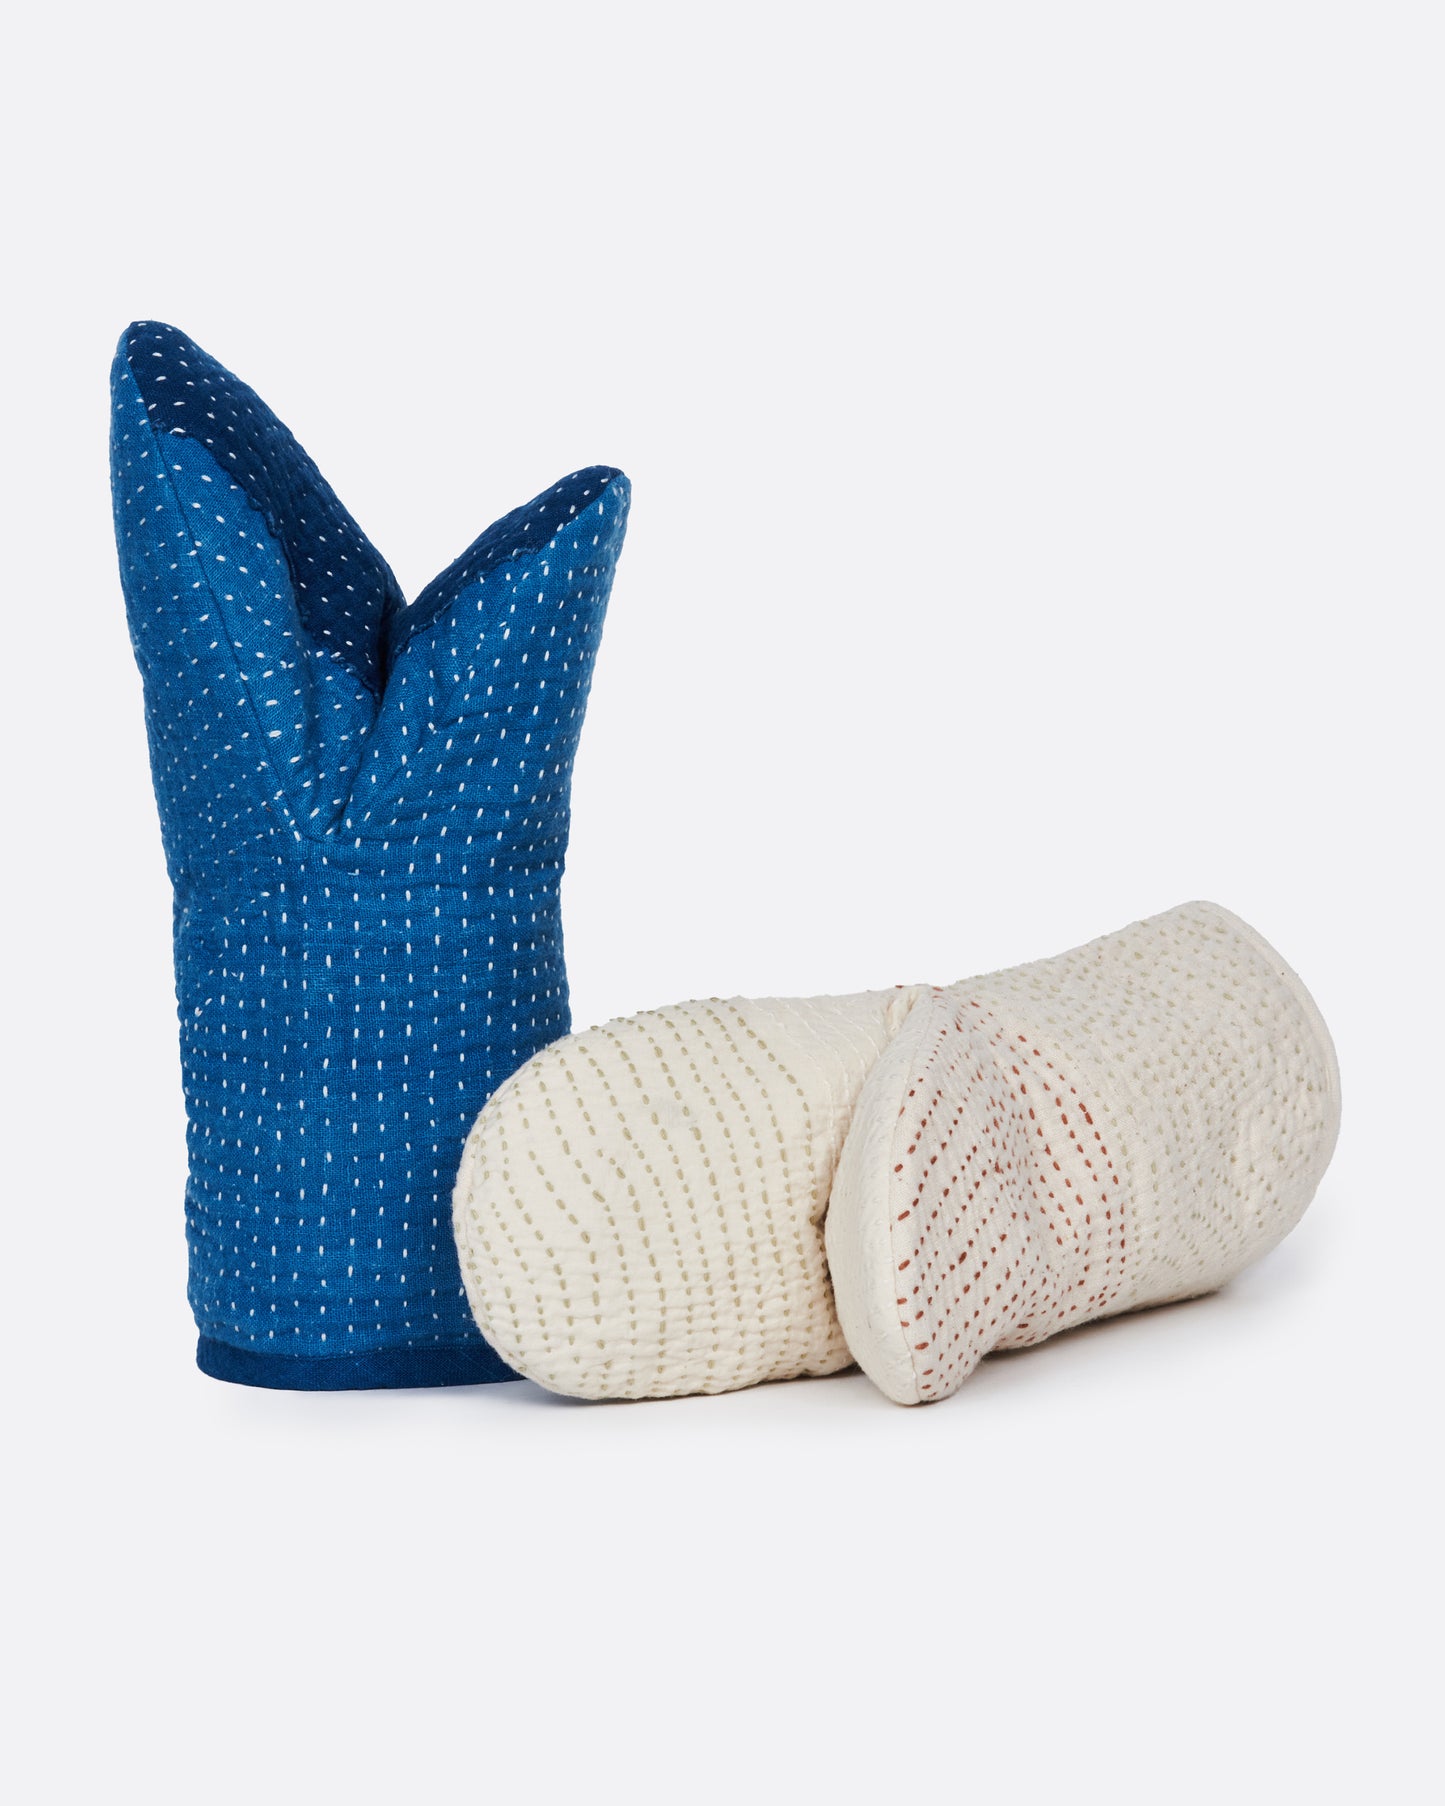 A pair of hand stitched oven mitts; one blue and one ivory.